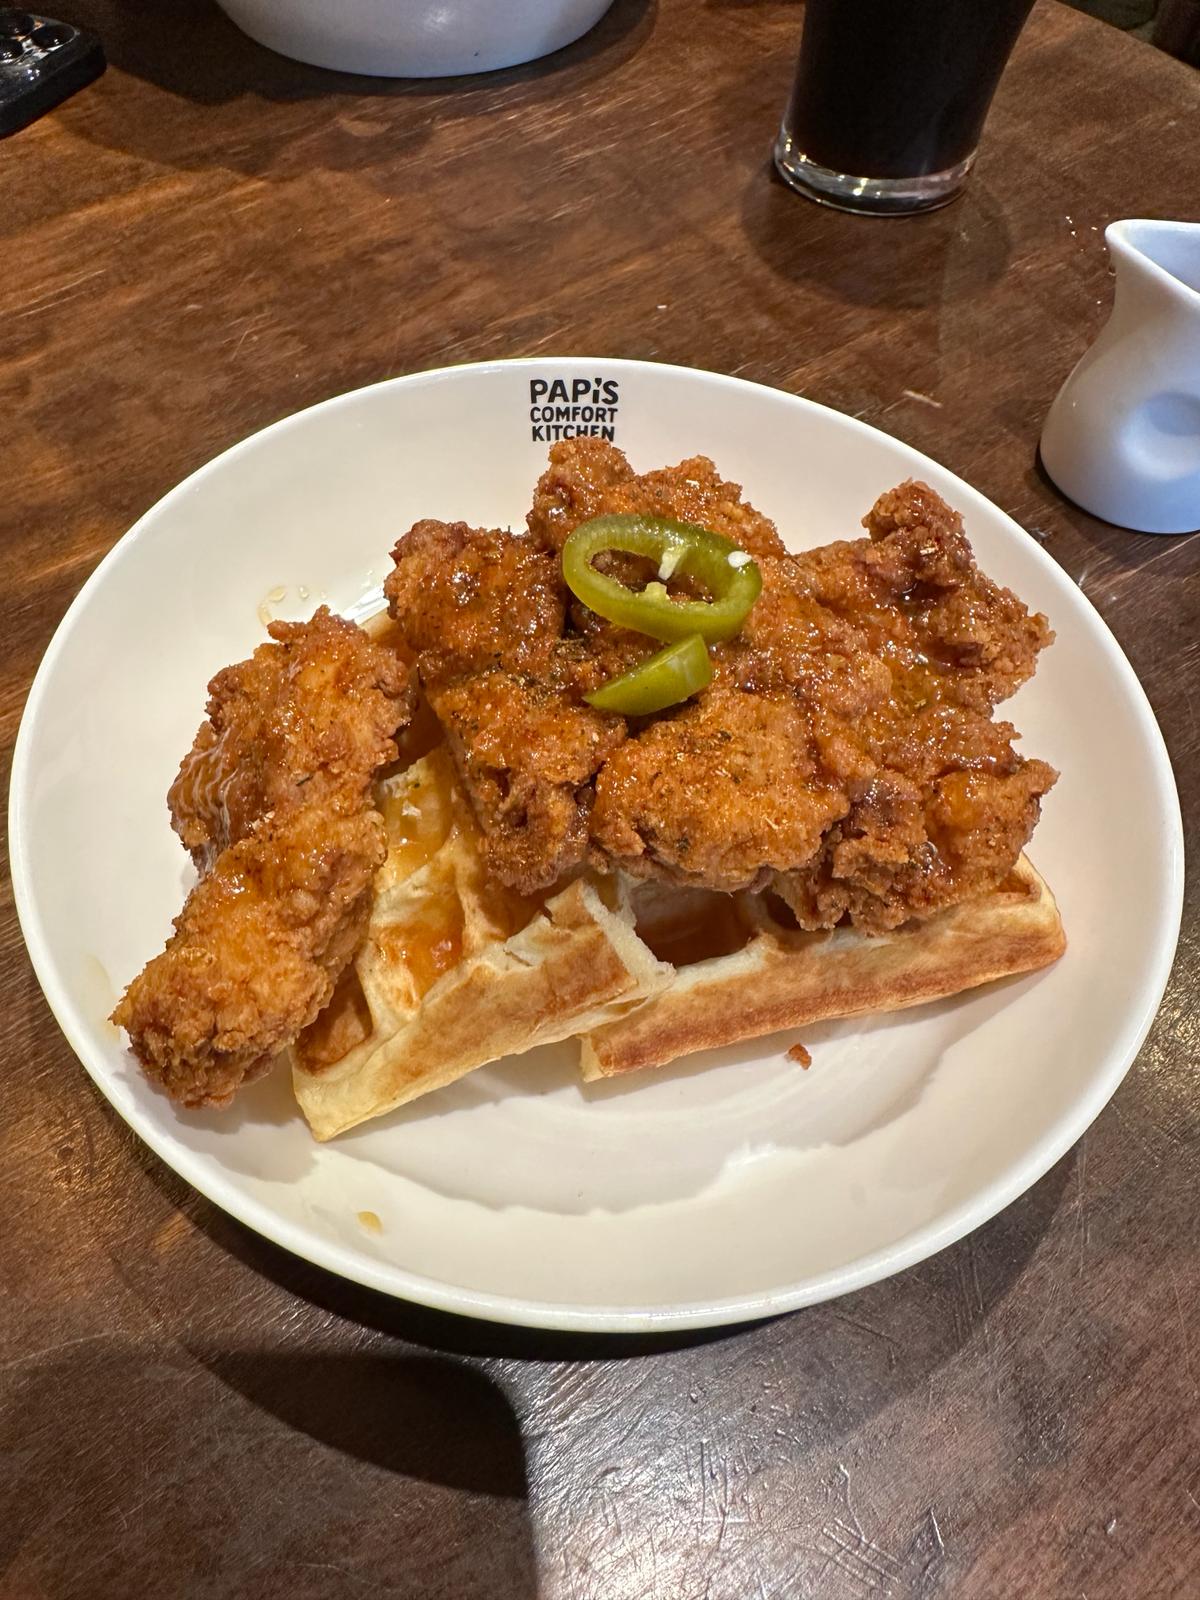 Chicken and waffles at Papi's Comfort Kitchen